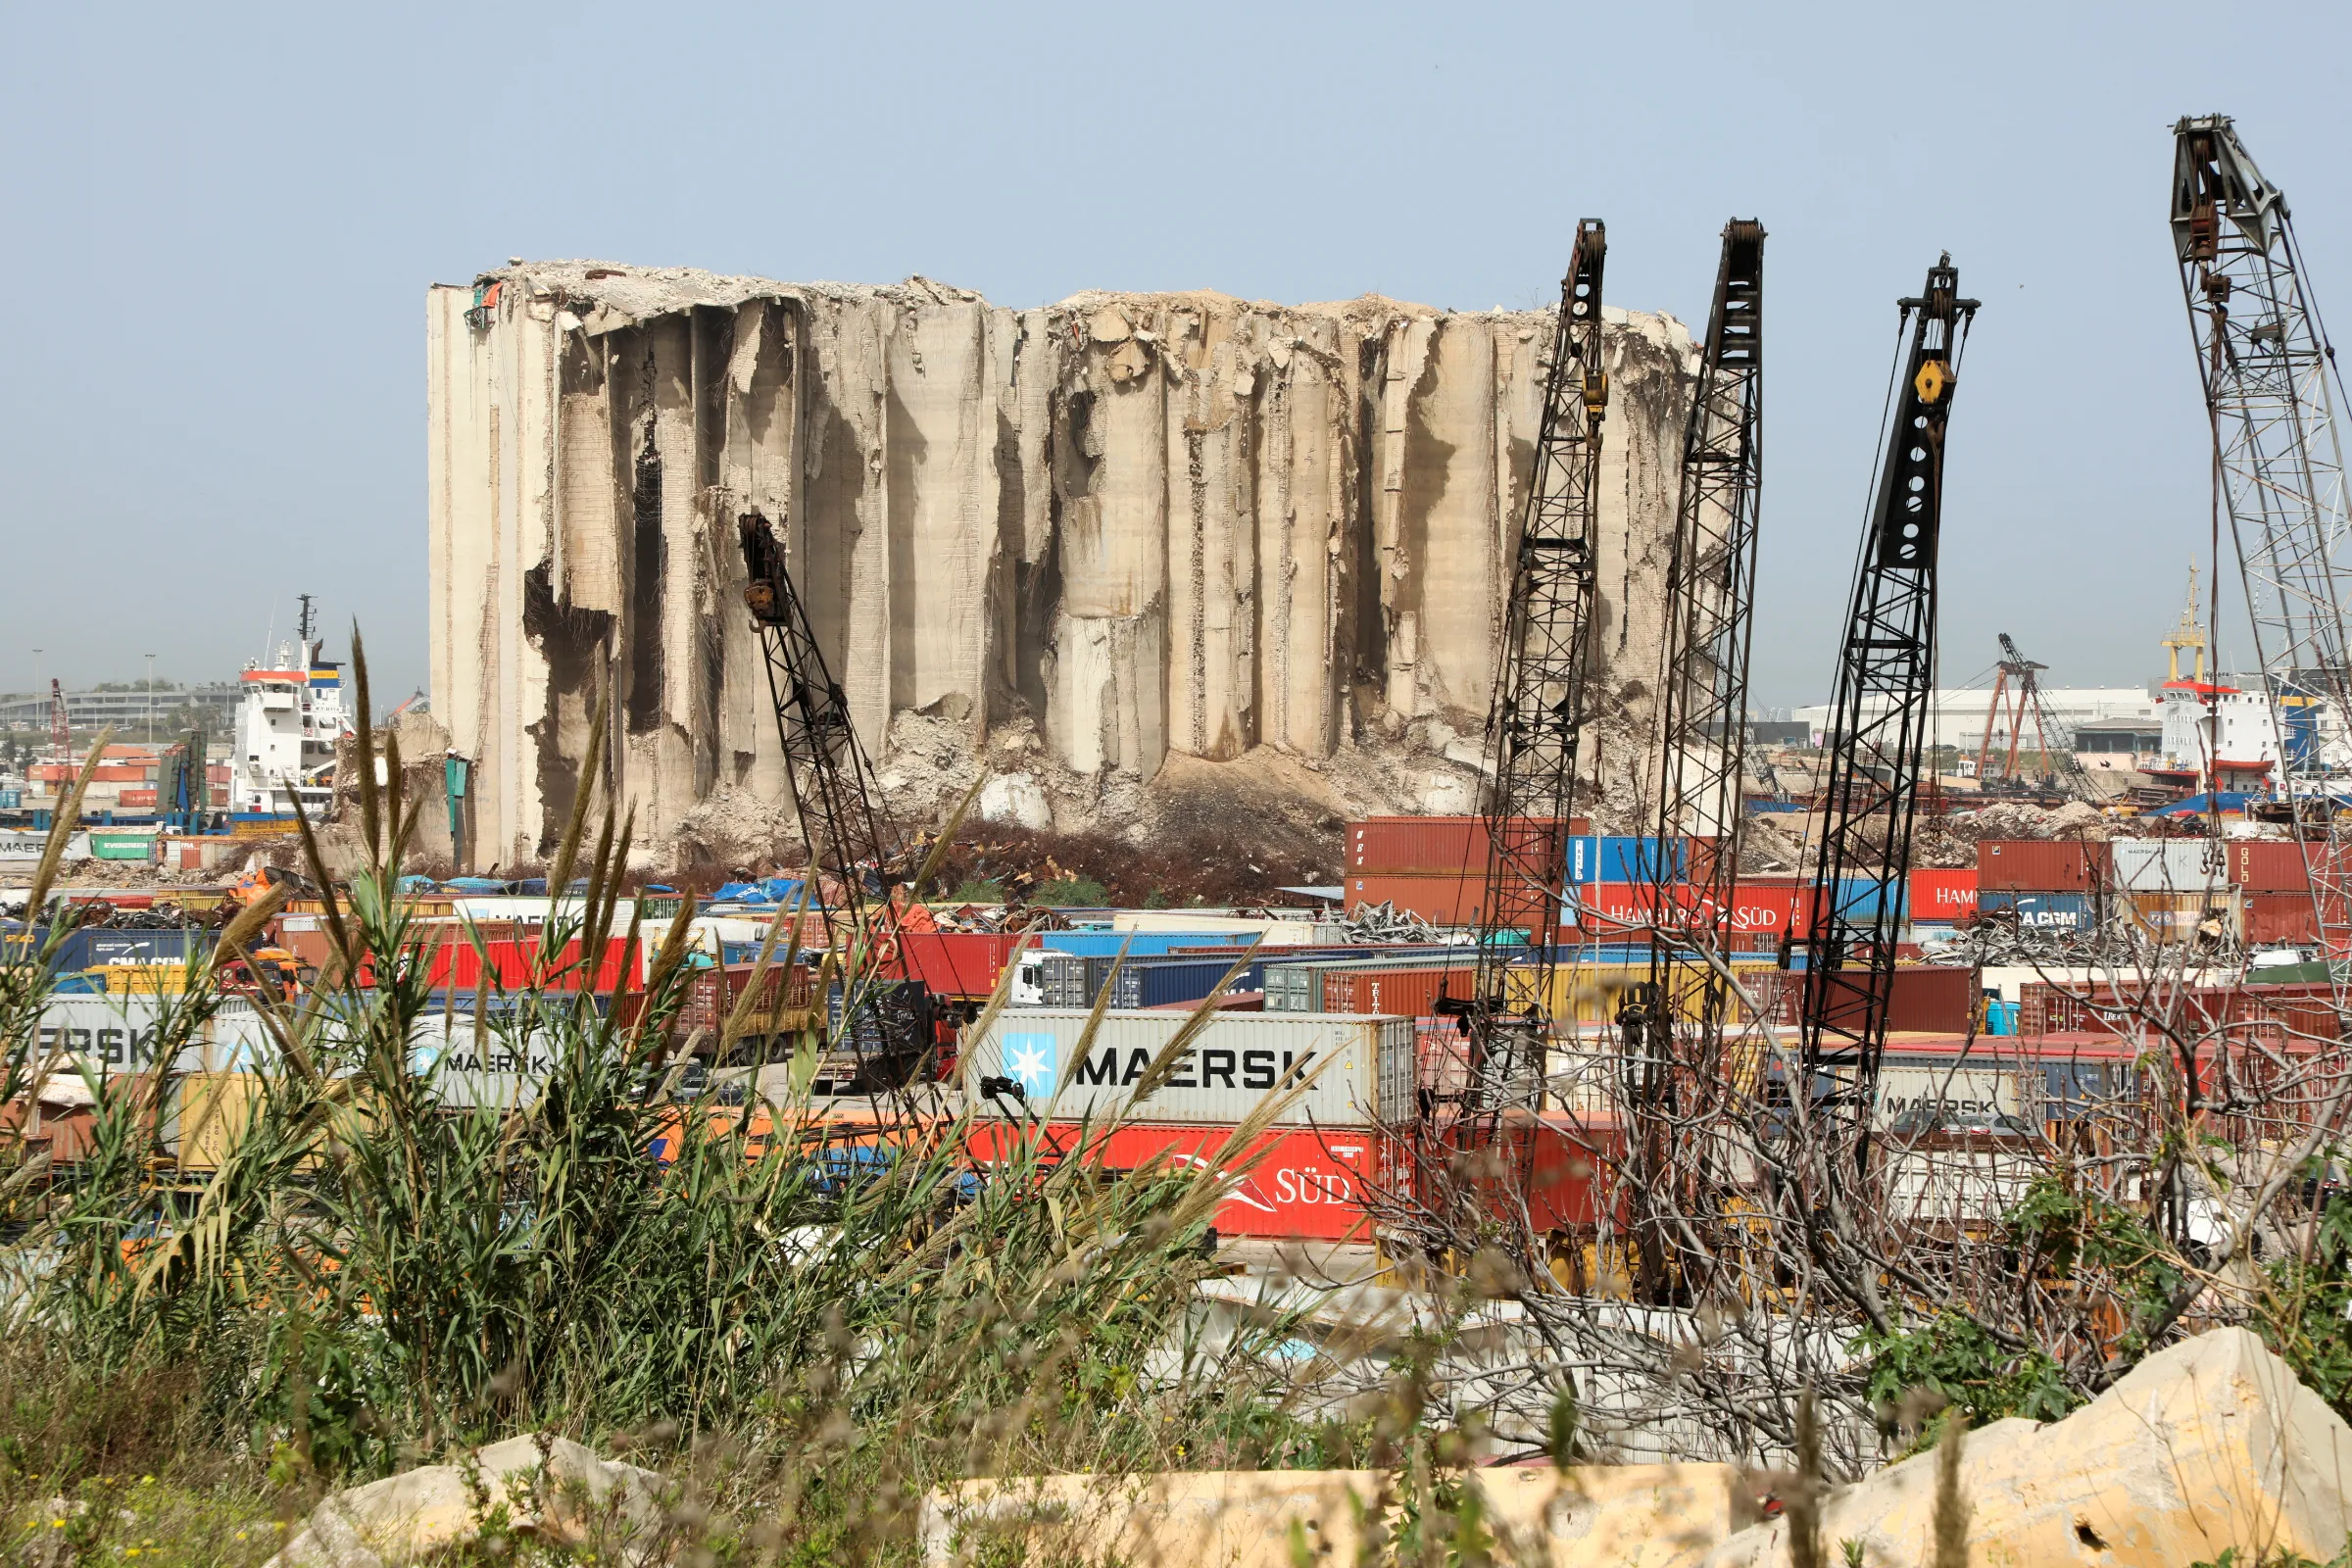 A general view shows the grain silo damaged during the 2020 Beirut port explosion in Beirut